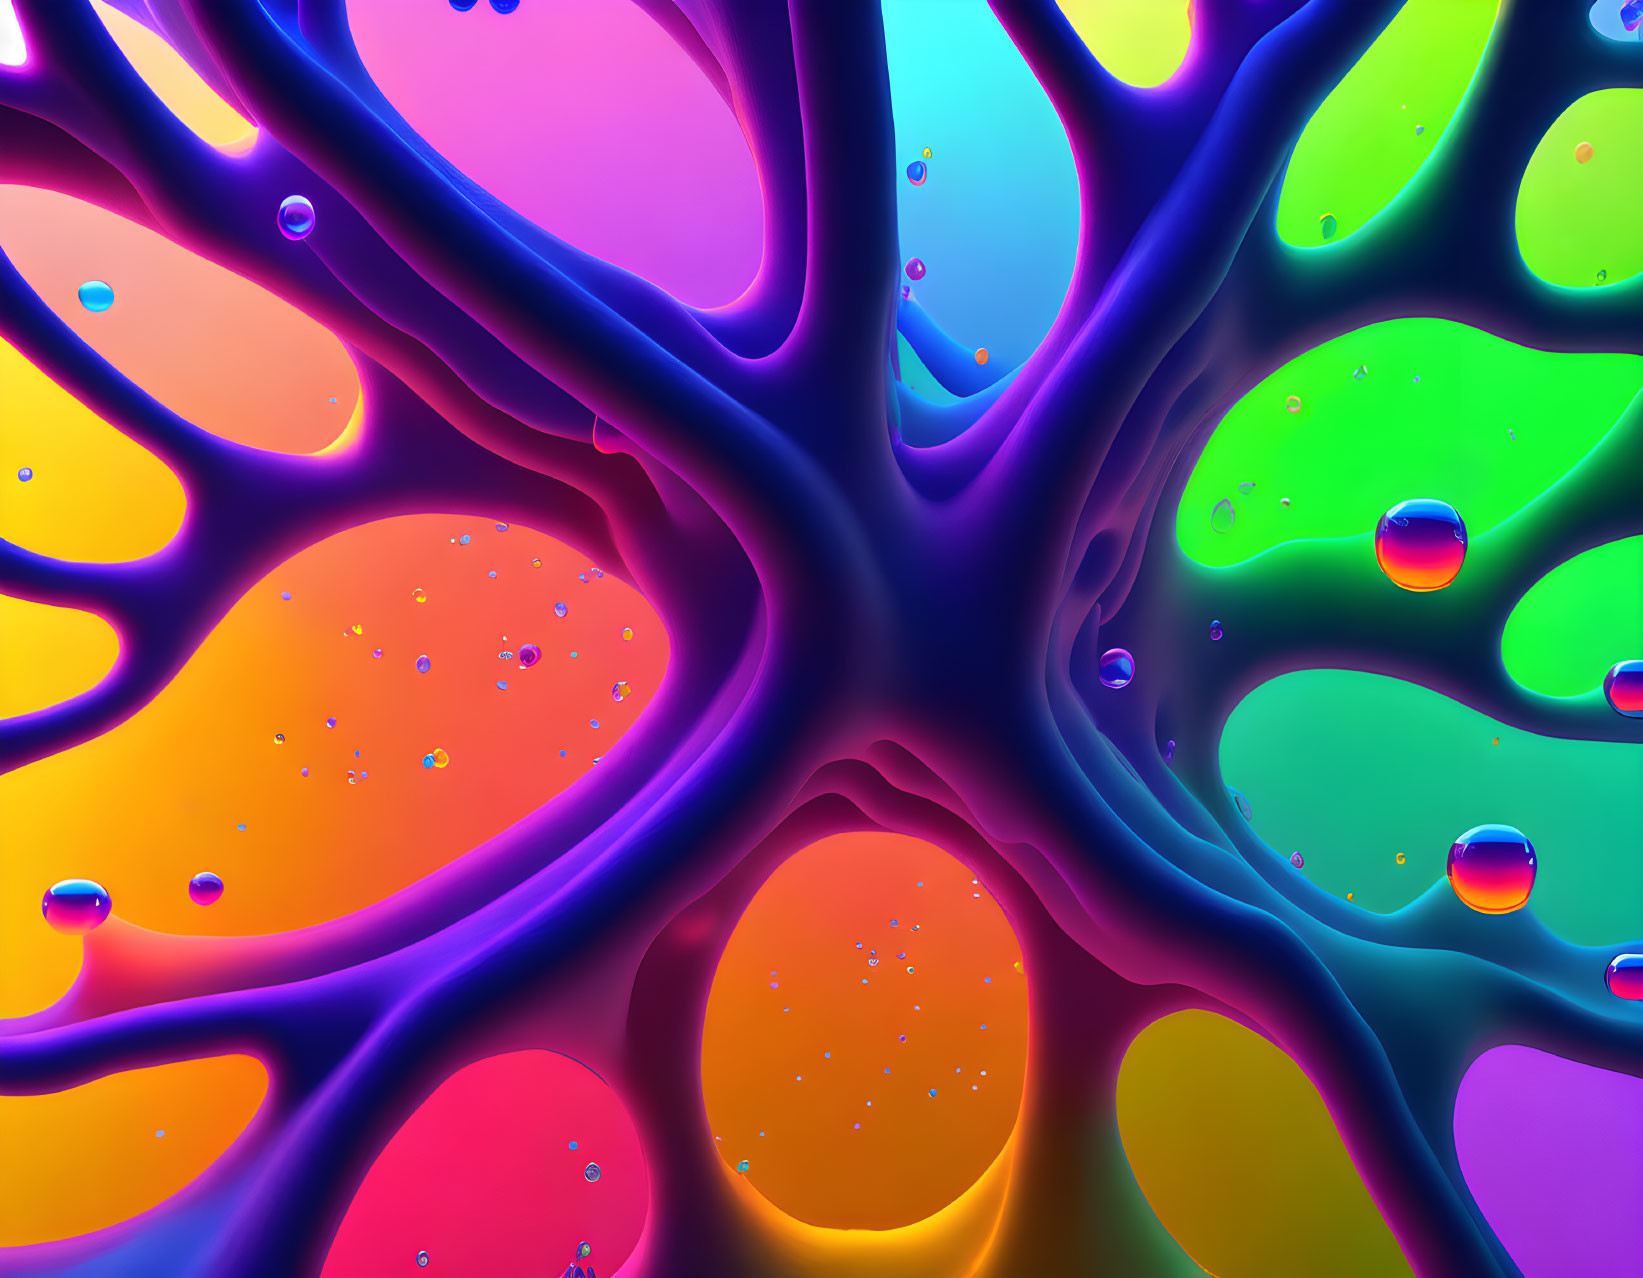 neuron filled with colorful shapes 